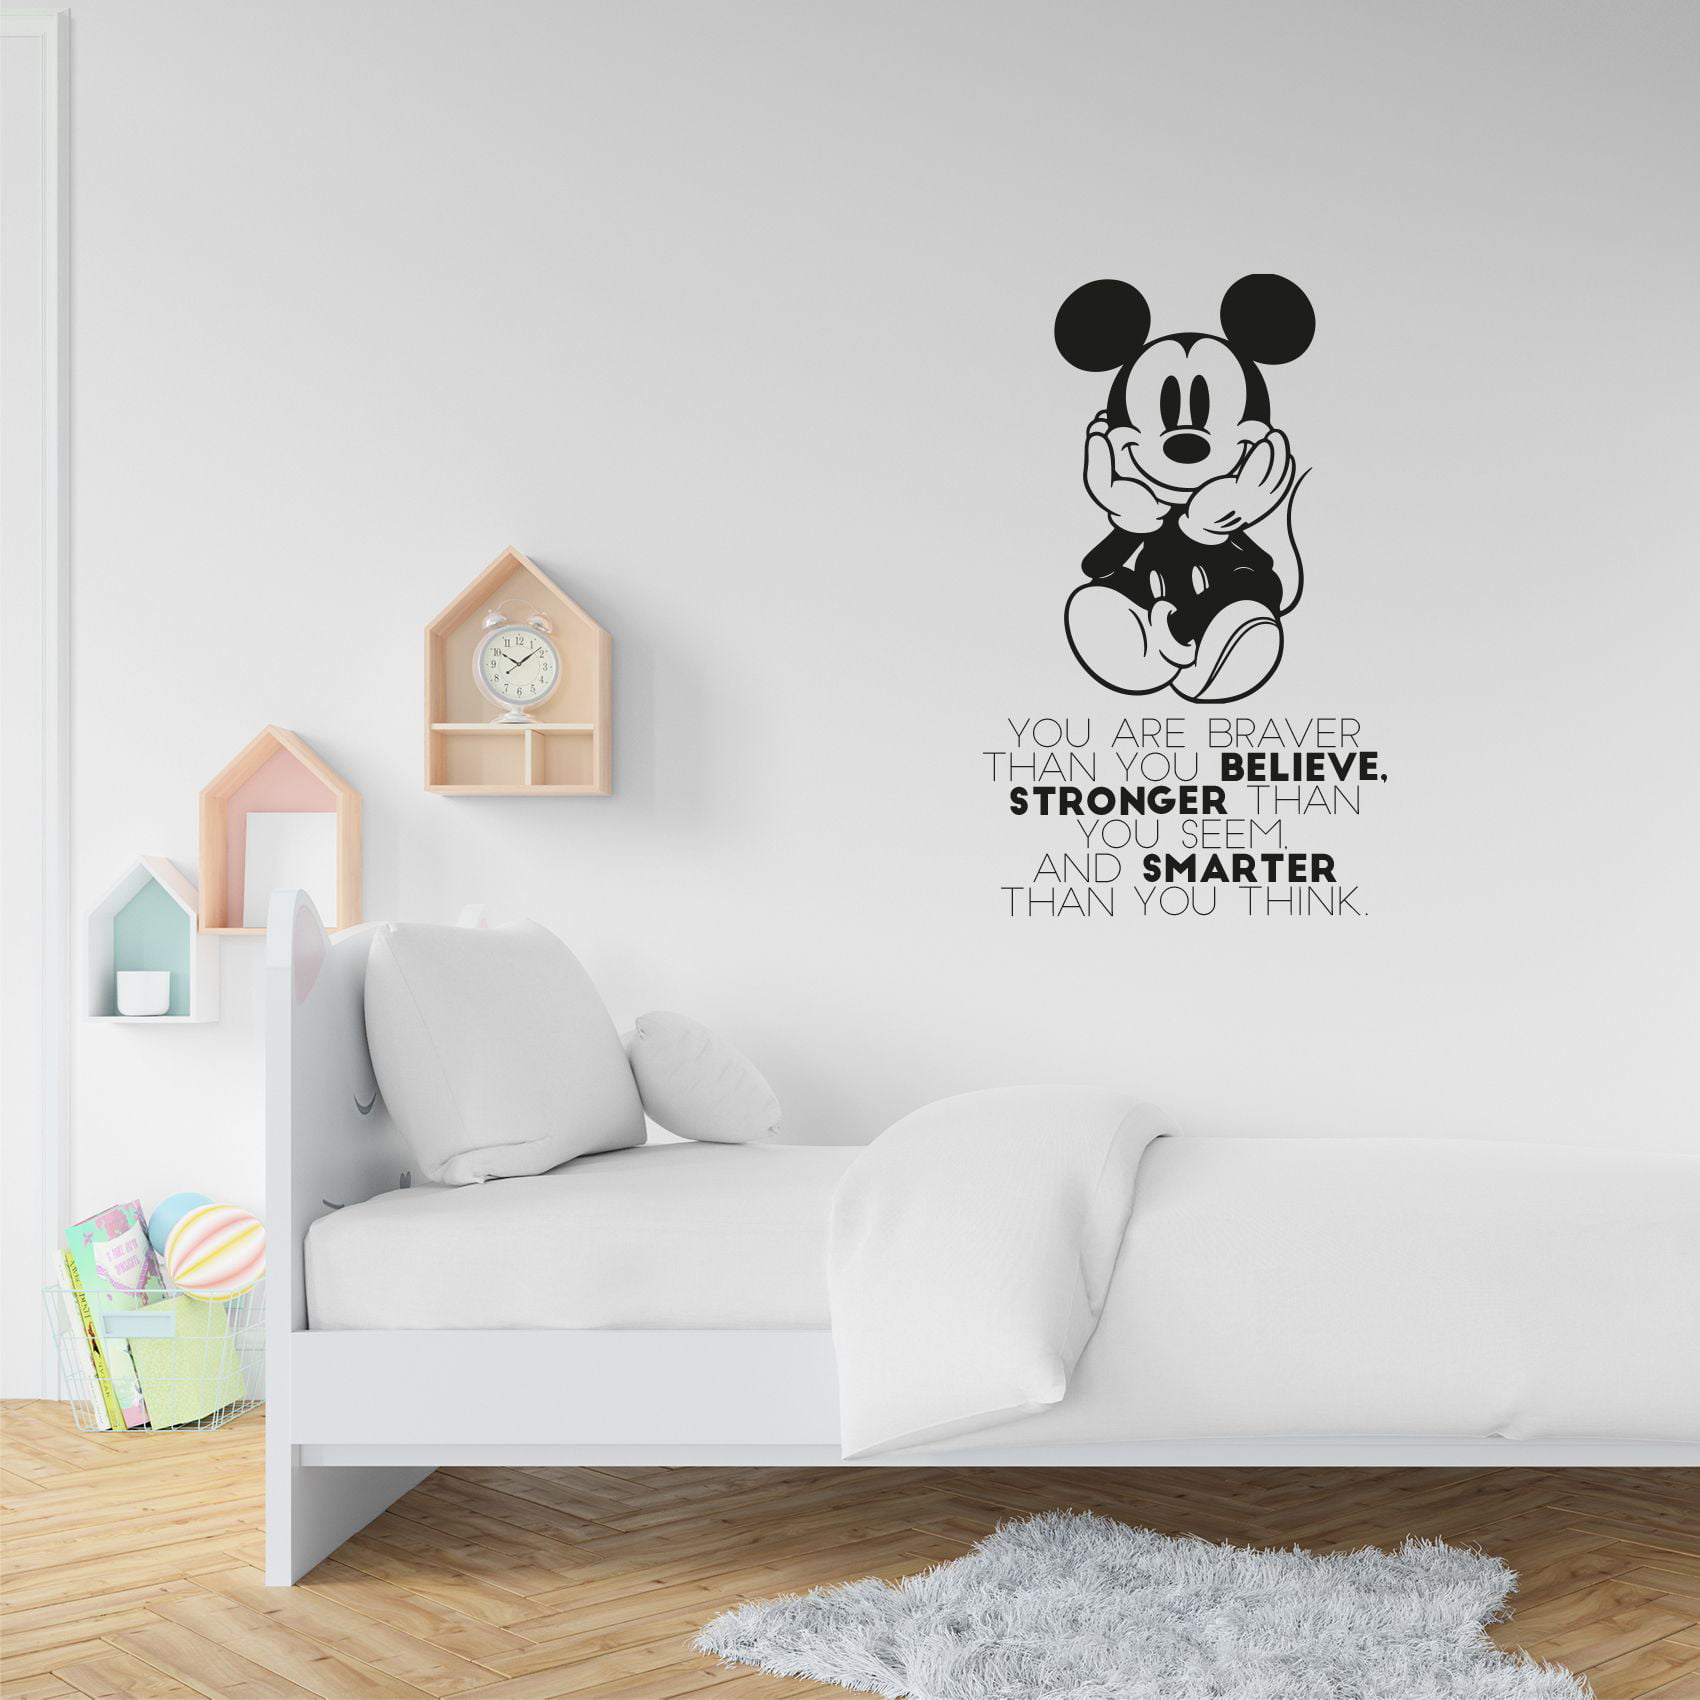 Details about   THE LION KING movie quote wall decal kids bedroom nursery wall sticker 